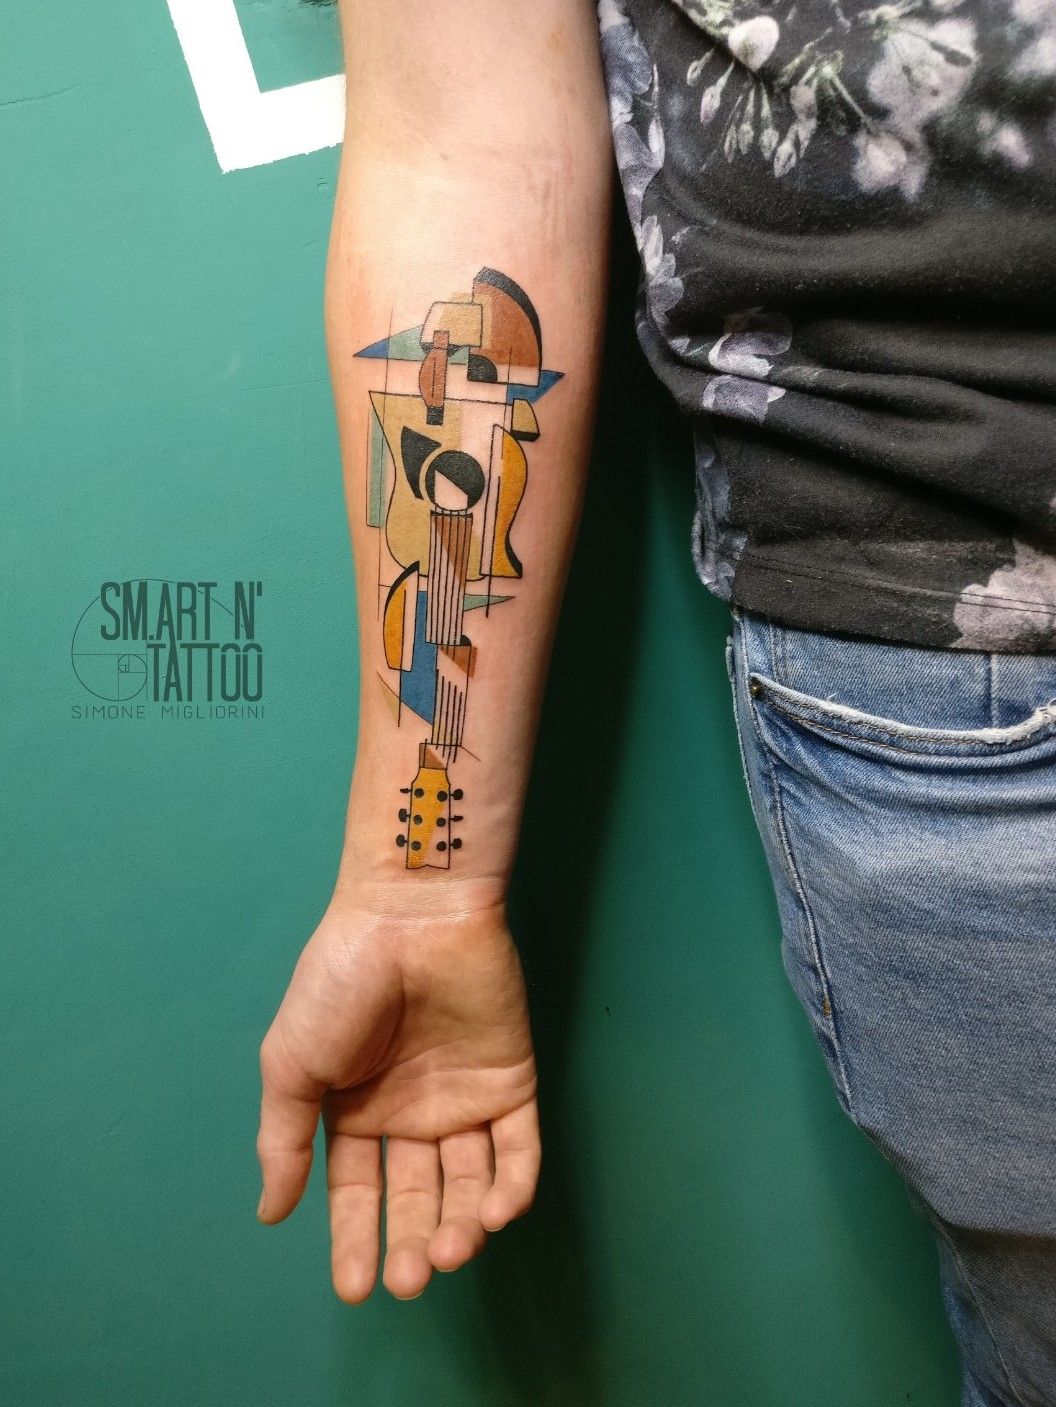 Art People Gallery - Surreal Cubist Tattoos by Expanded Eye #artpeople  Submit your Artwork and join our artists @ www.artpeople.net | Facebook